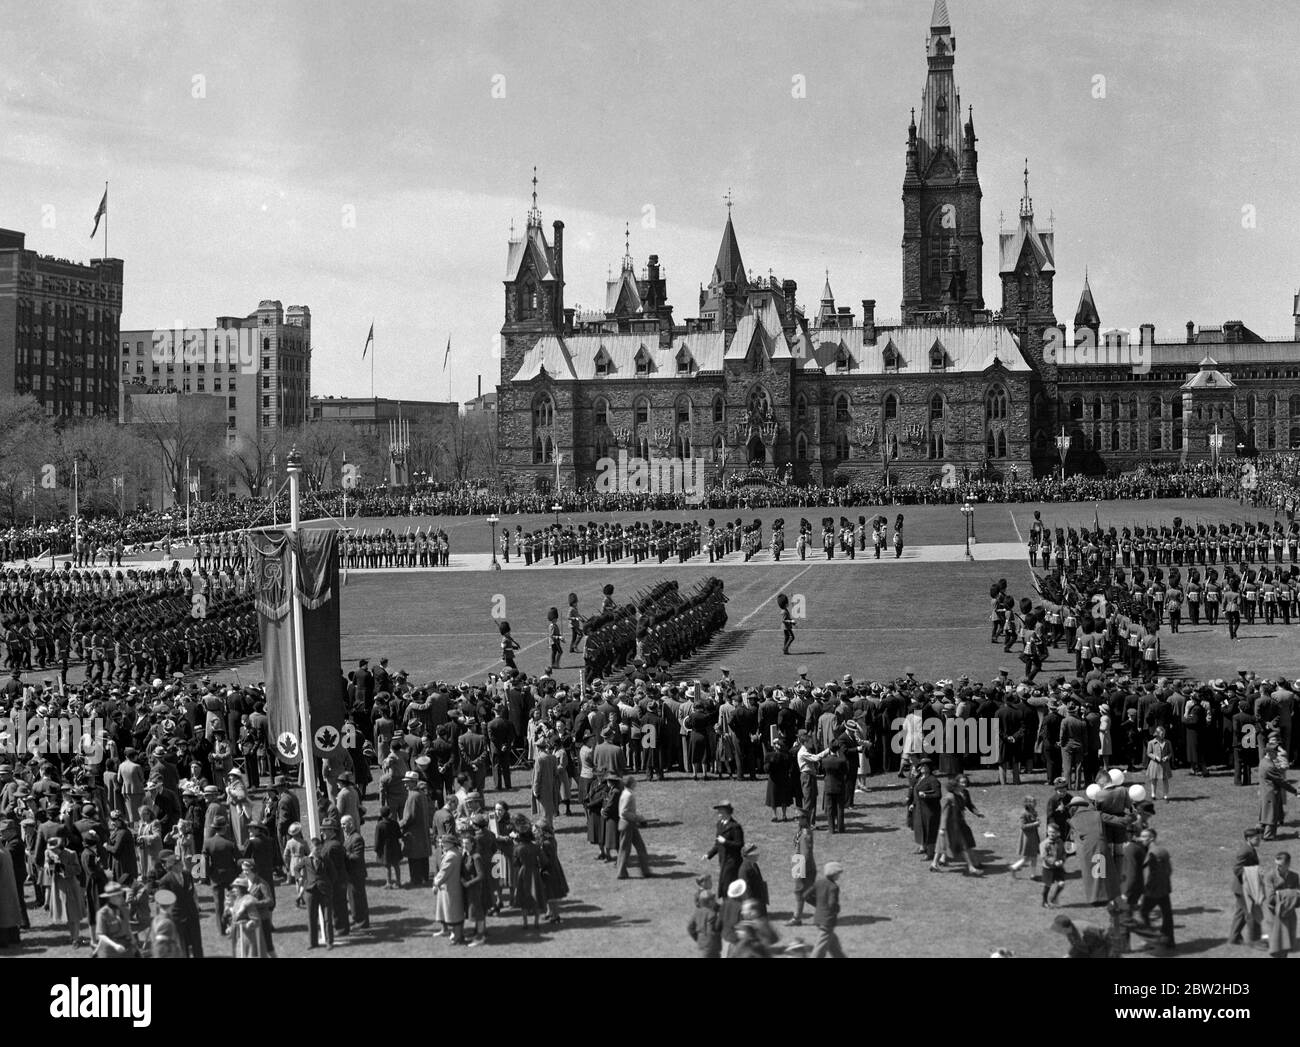 The Royal tour of Canada and the USA by King George VI and Queen Elizabeth , 1939 On Saturday , 20th May , the King 's official birthday was celebrated by the Trooping of the Colour by the brigade of Canadian Guards . There could have been no better setting for the ceremony than that provided by Parliament Square , Ottawa with the Parliament buildings in the background Stock Photo